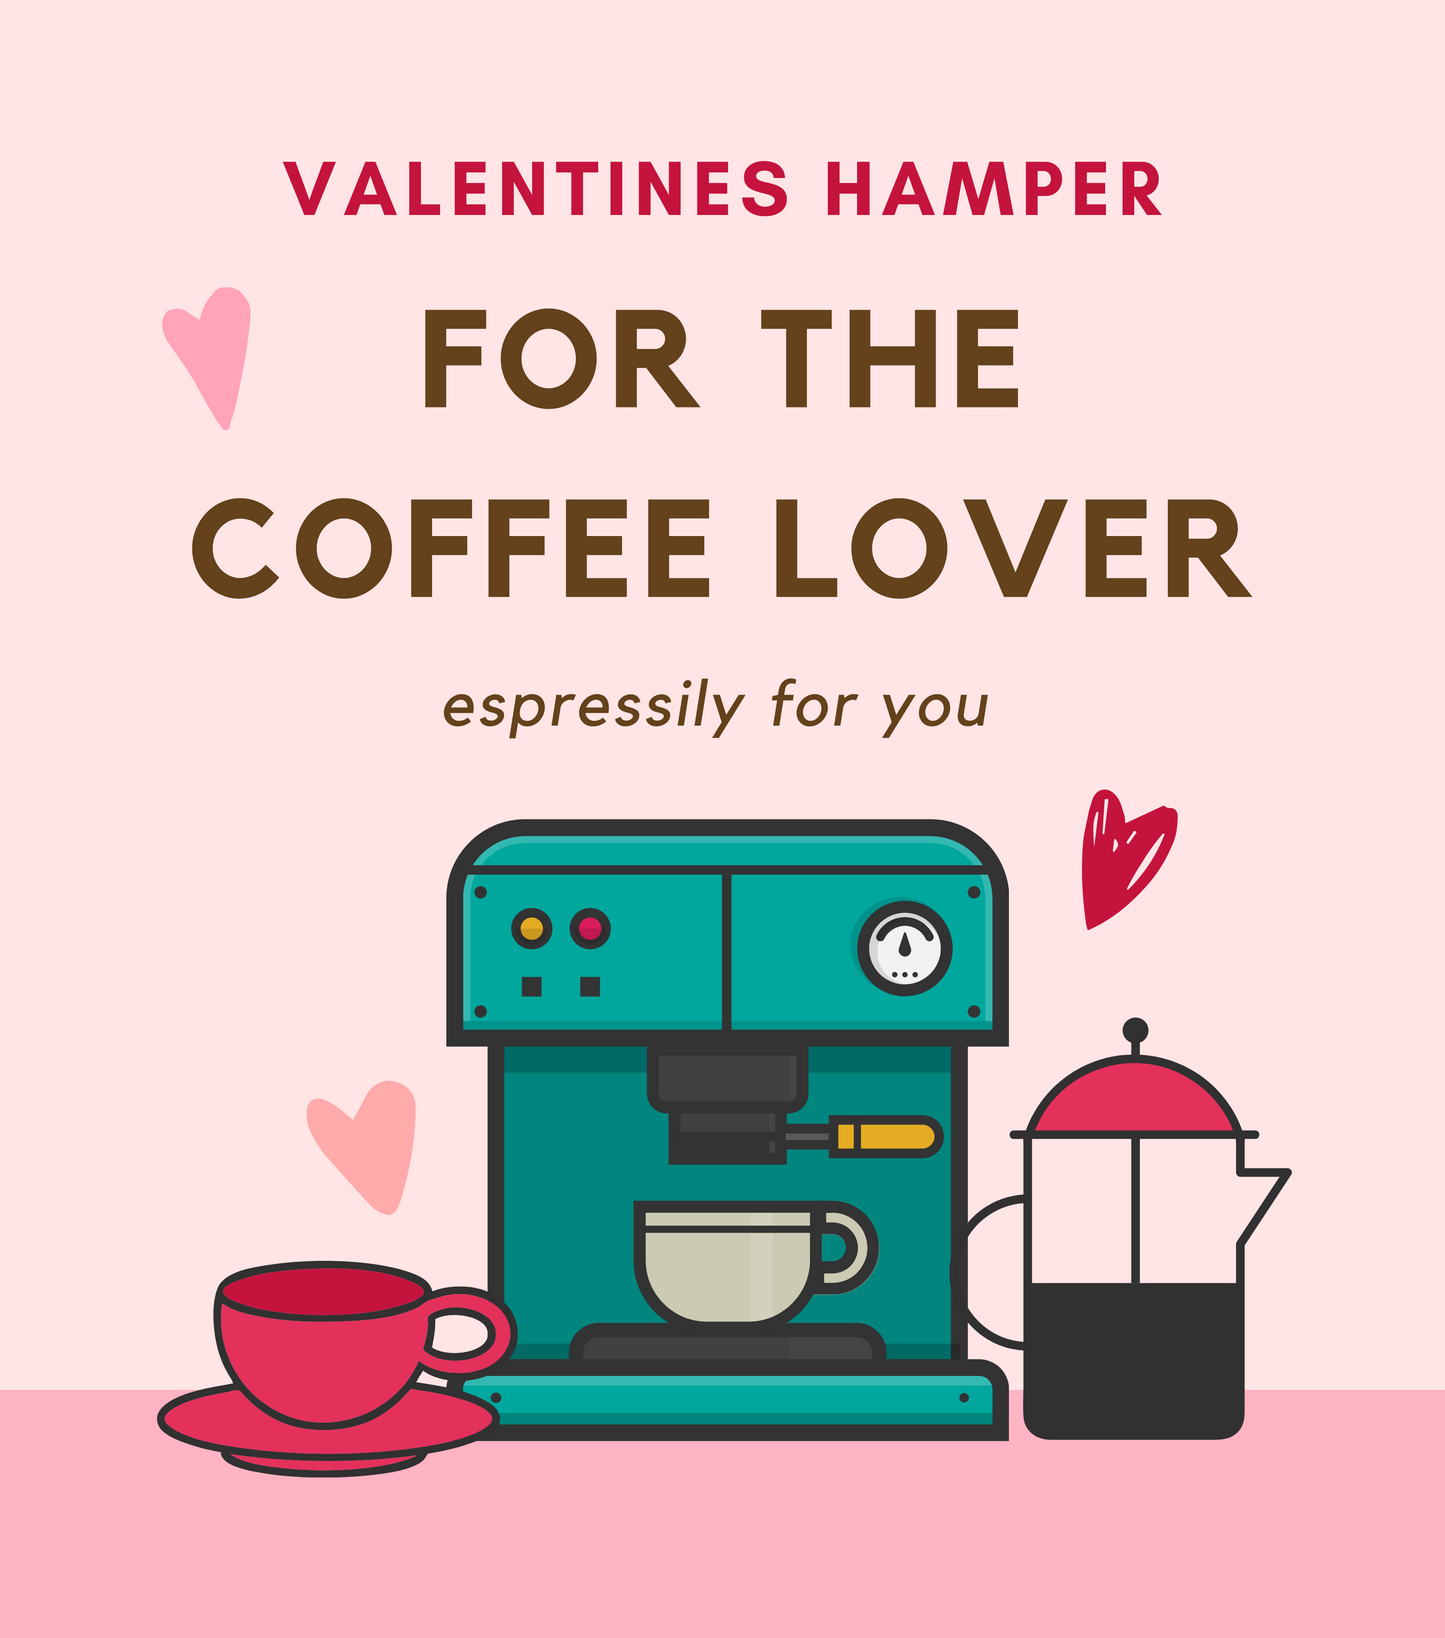 Valentines Day Hamper For the Coffee Lover